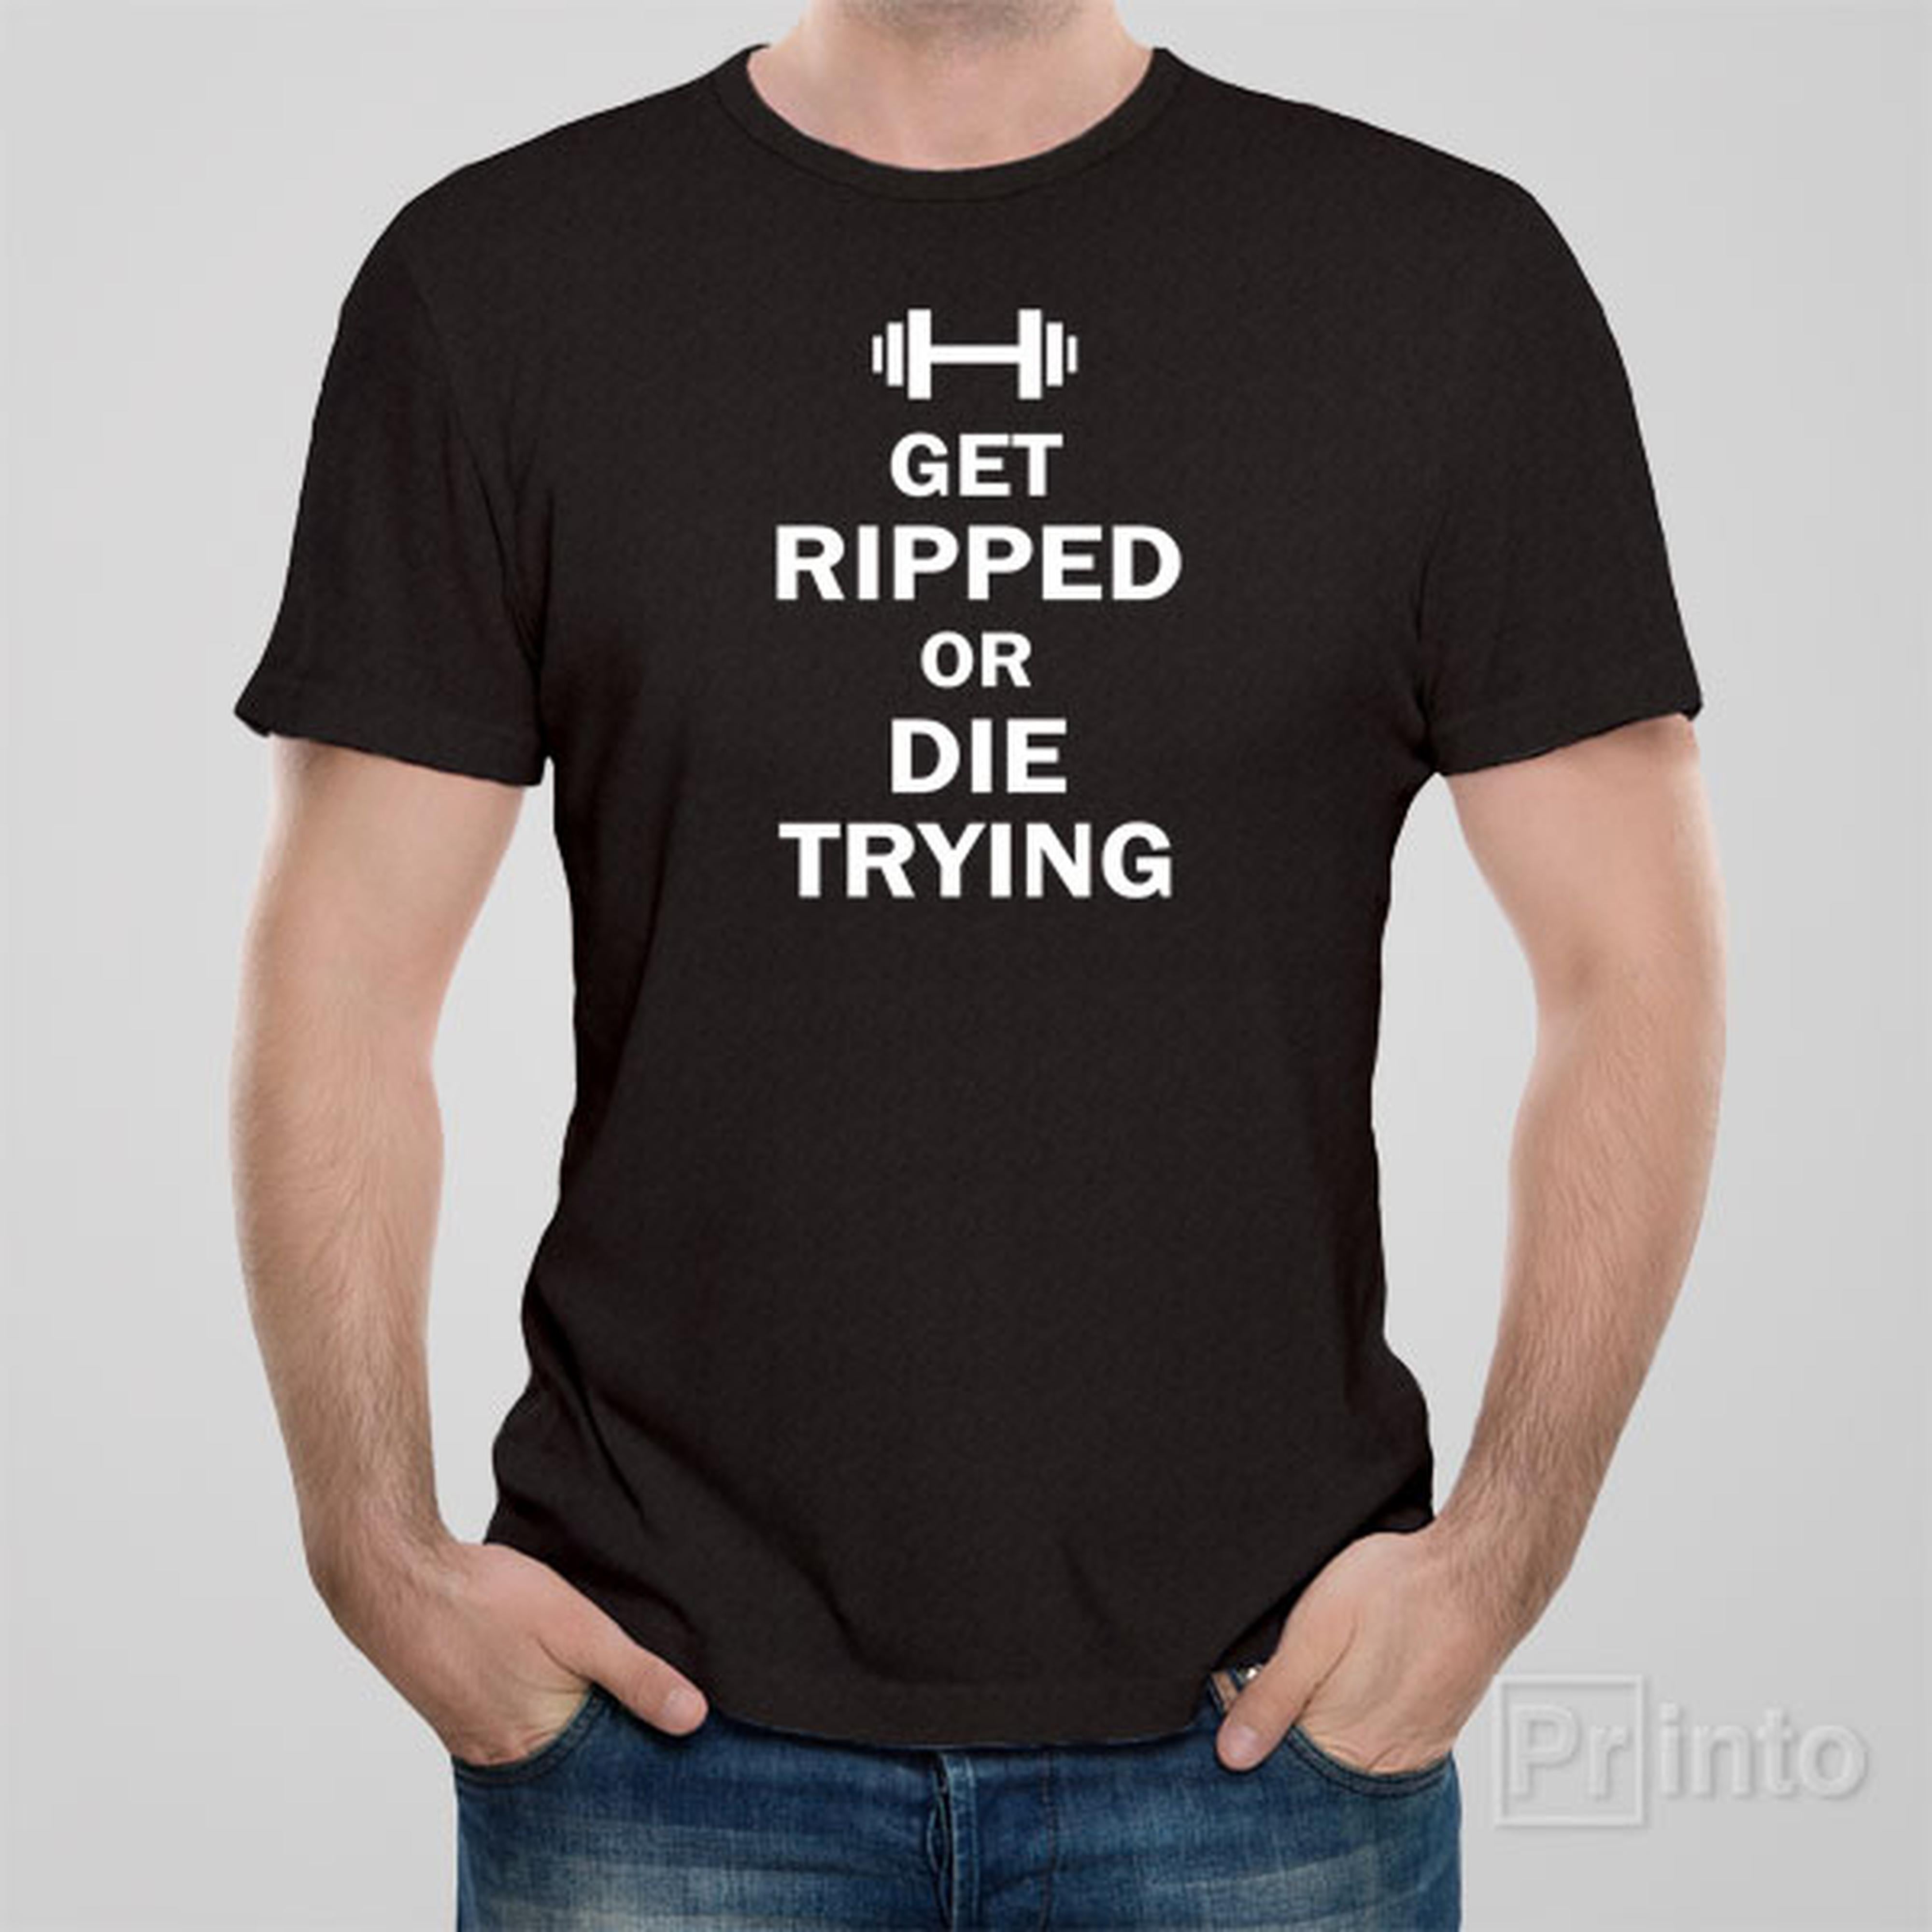 get-ripped-or-die-trying-t-shirt